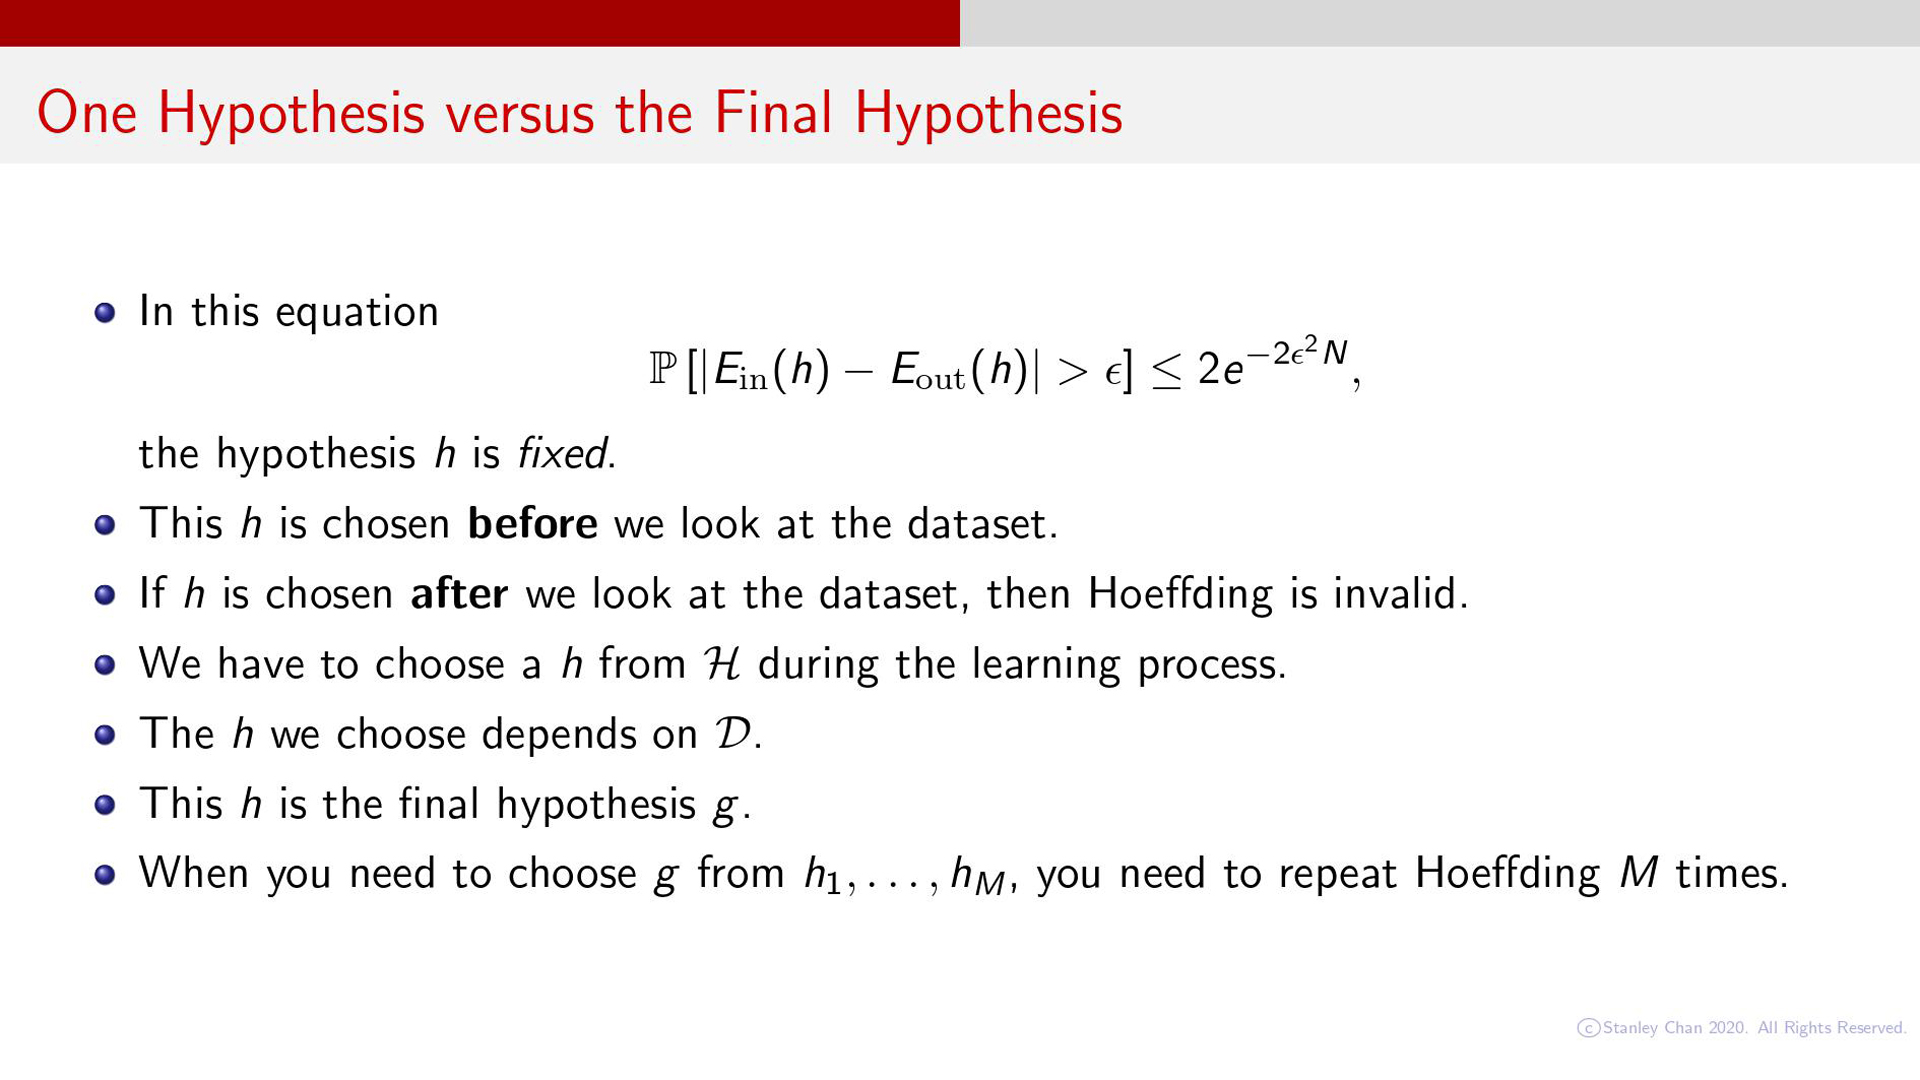 One Hypothesis versus the Final Hypothesis